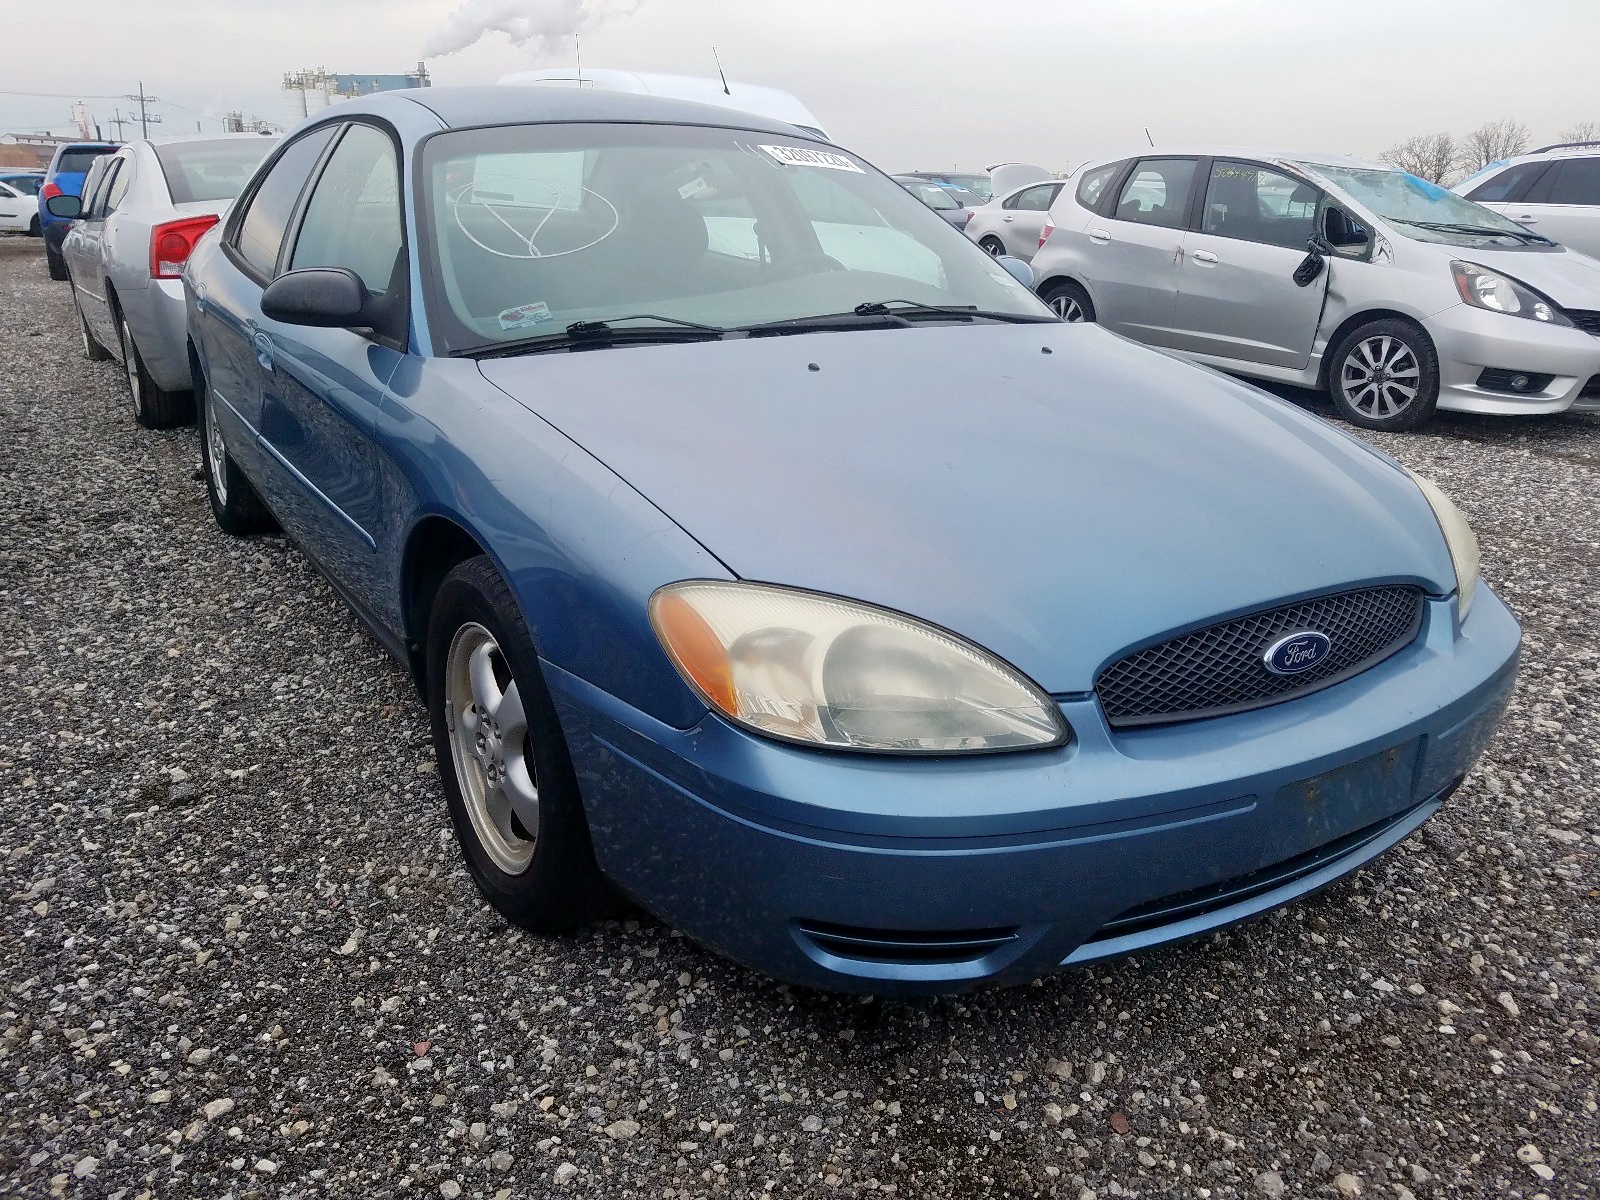 2005 Ford Taurus SE for sale at Copart Chicago Heights, IL Lot #32097*** |  SalvageReseller.com